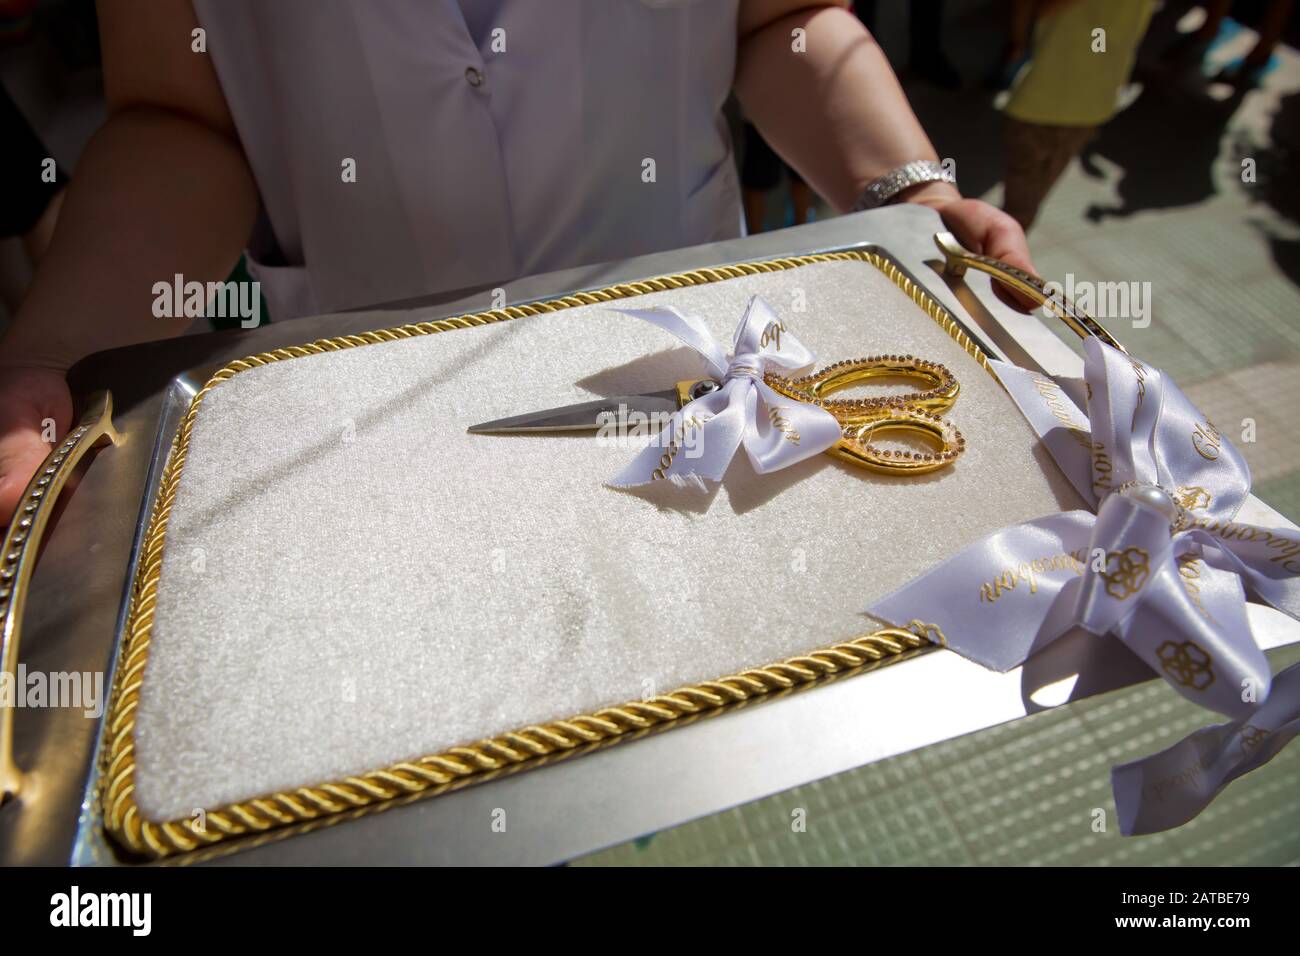 https://c8.alamy.com/comp/2ATBE79/scissors-for-the-ceremonial-ribbon-cutting-at-the-opening-ceremony-on-the-white-cushion-and-tray-with-handles-2ATBE79.jpg